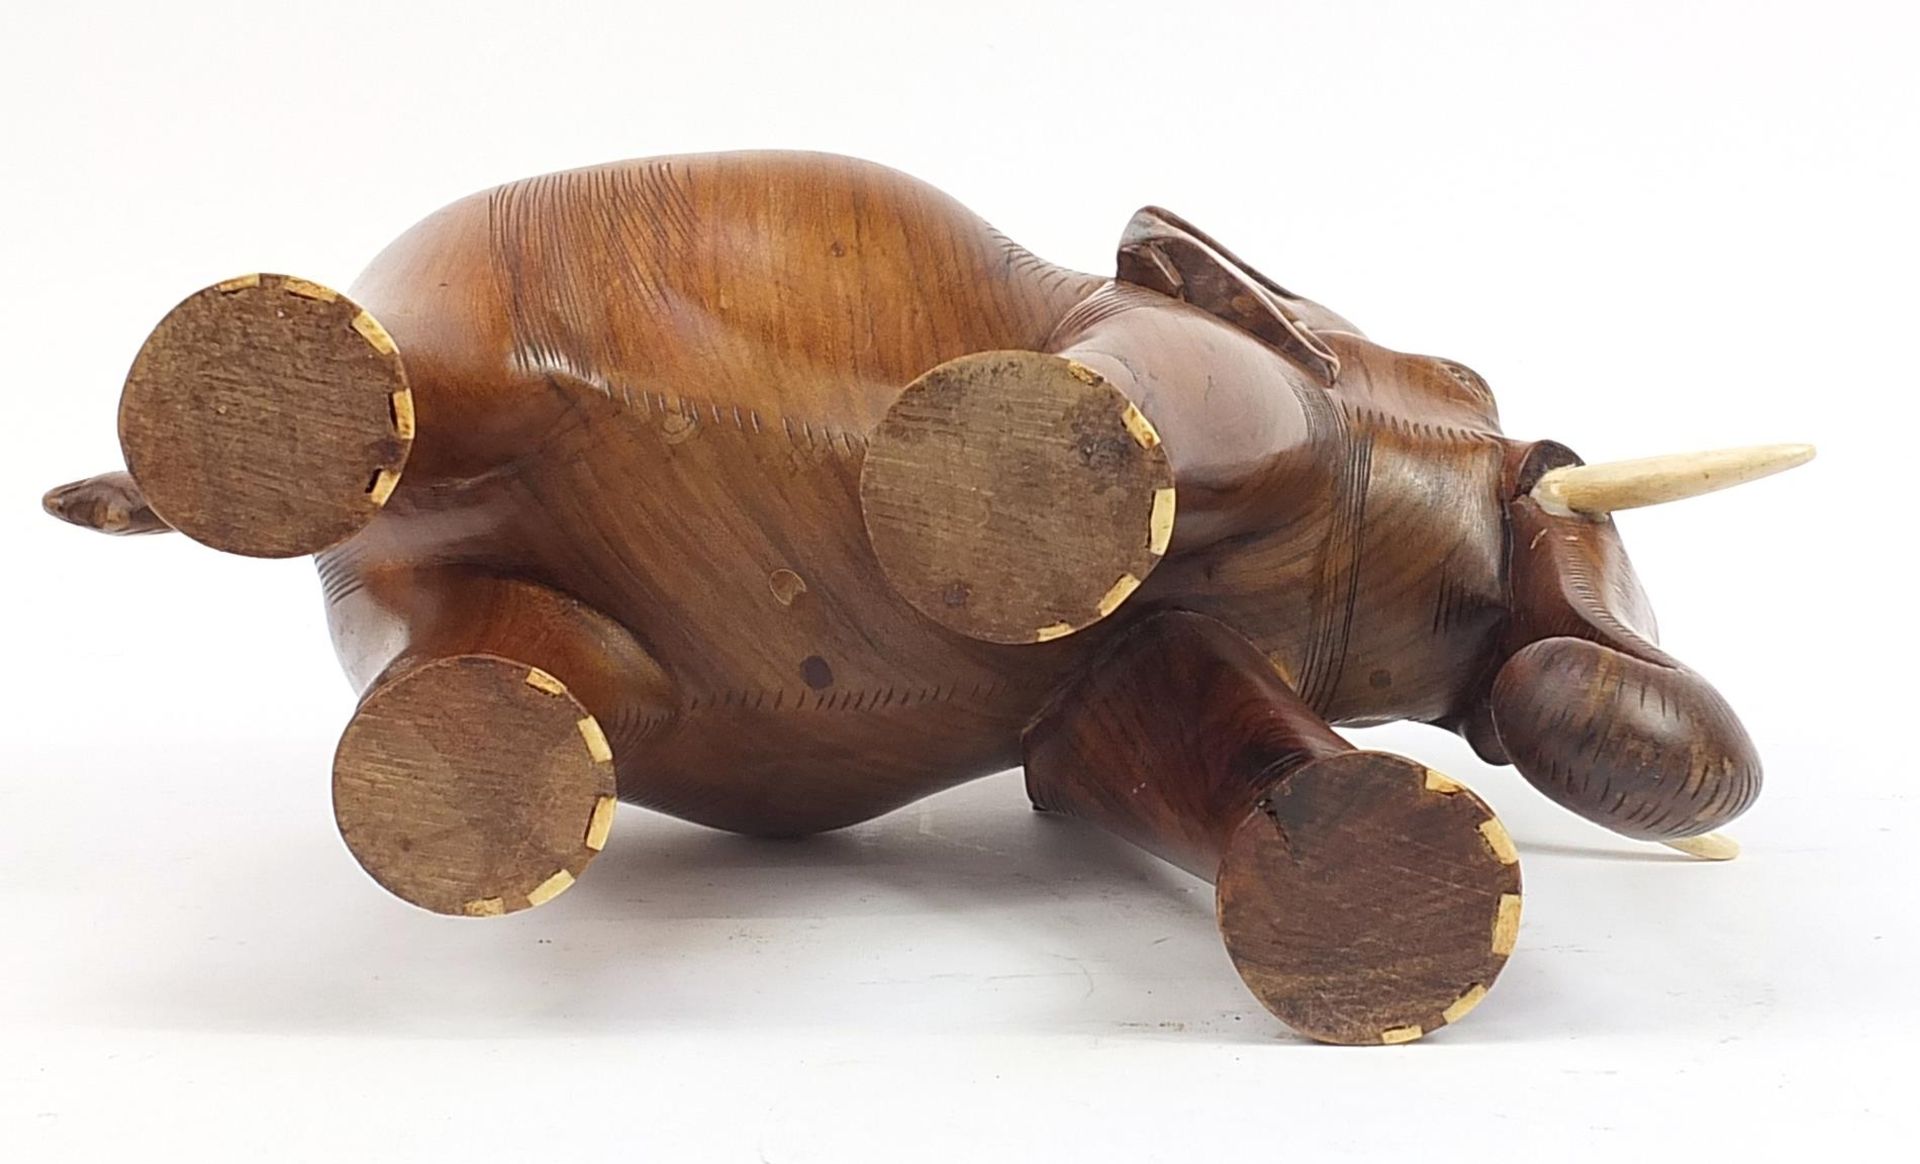 Large African hardwood carving of an elephant, 39cm in length - Image 3 of 3